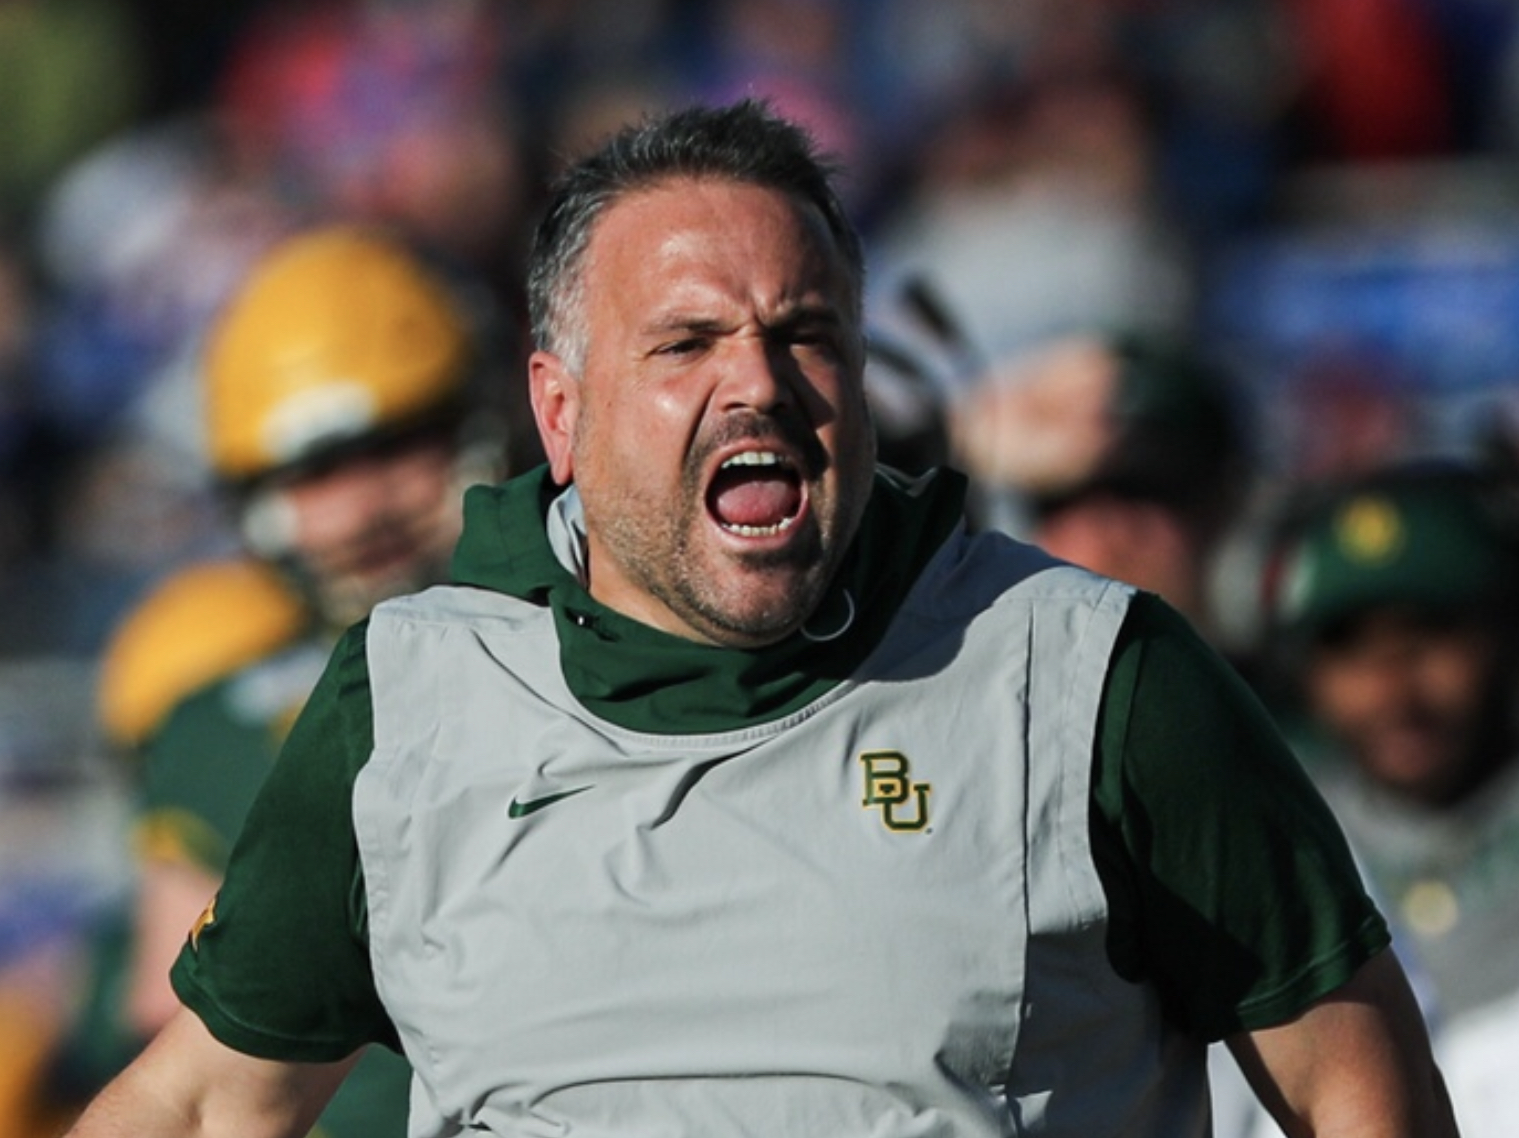 Hypocritical Matt Rhule quote making its rounds after move to the NFL1519 x 1138